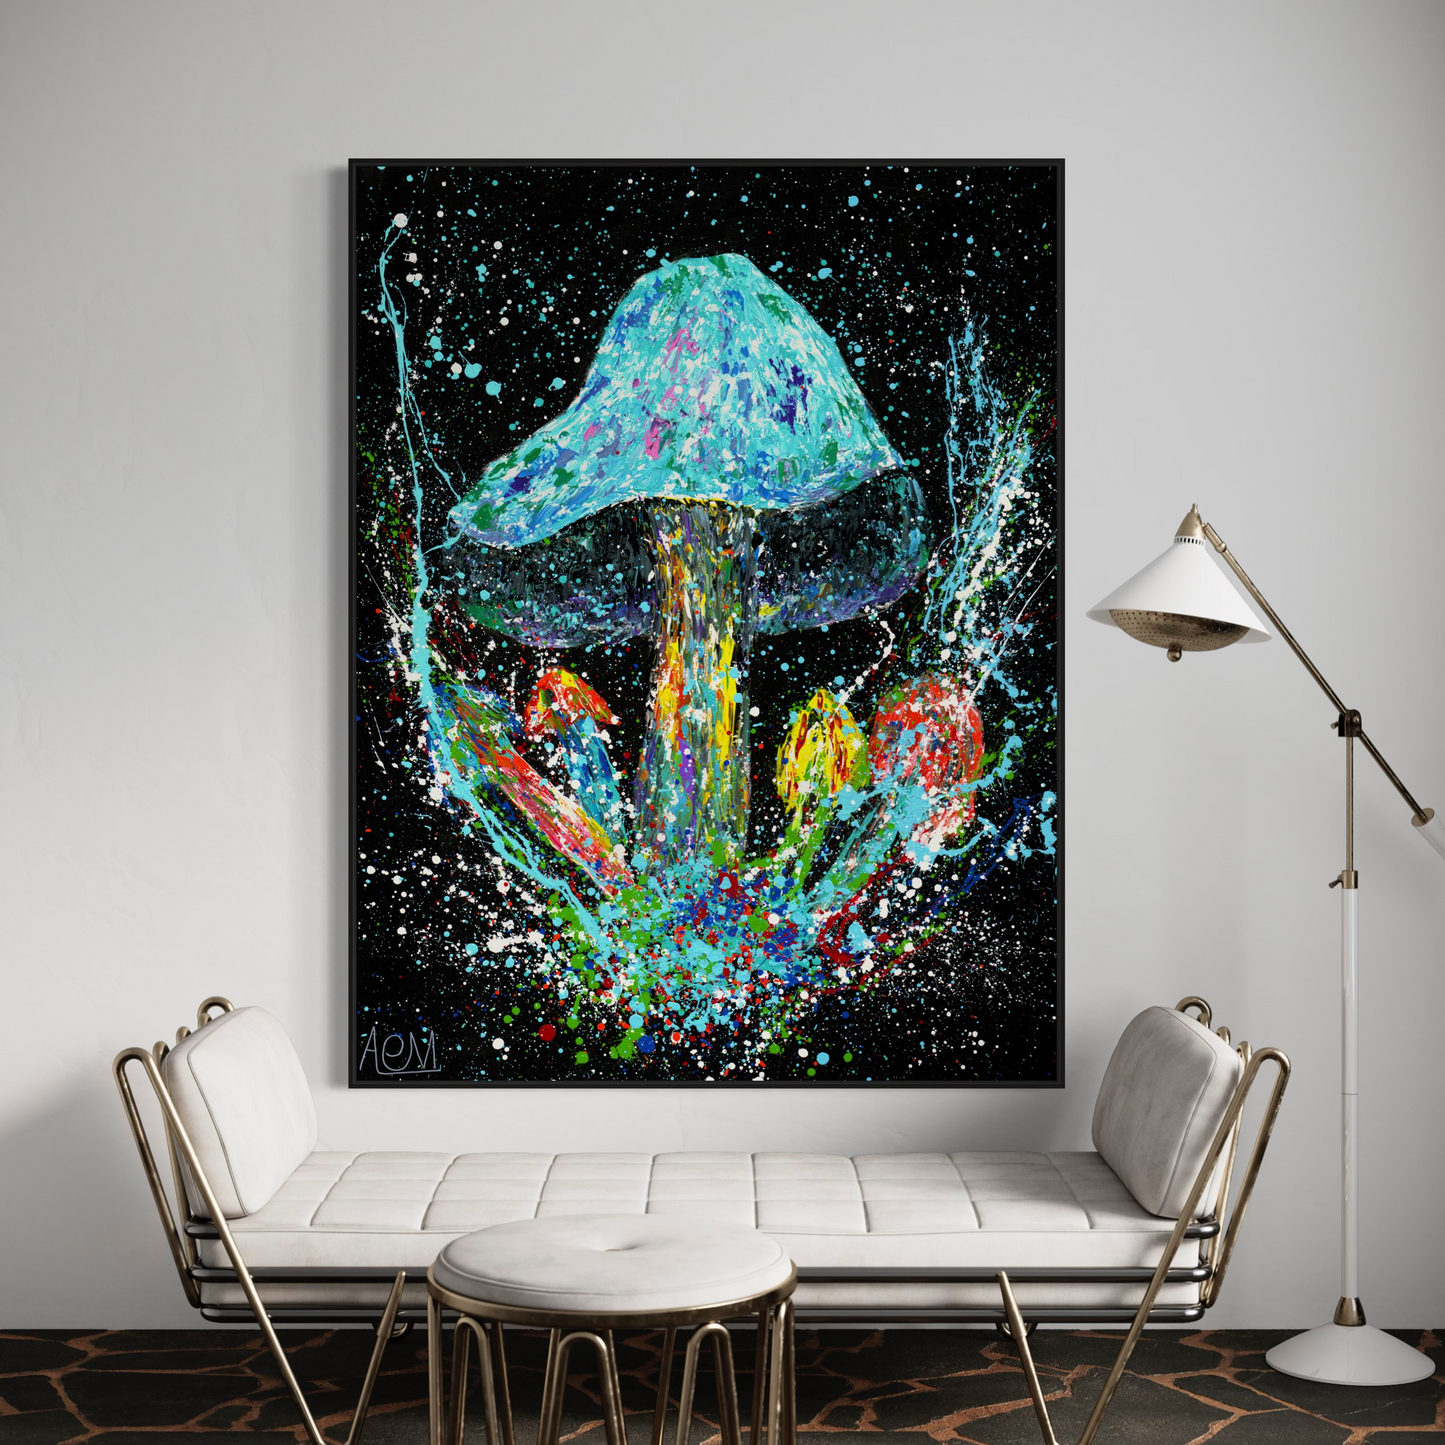 Abstract cosmic mushroom canvas painting dominating a modern living room wall, with vibrant splashes of color against a stark black background, creating a striking visual centerpiece above a minimalist white sofa.